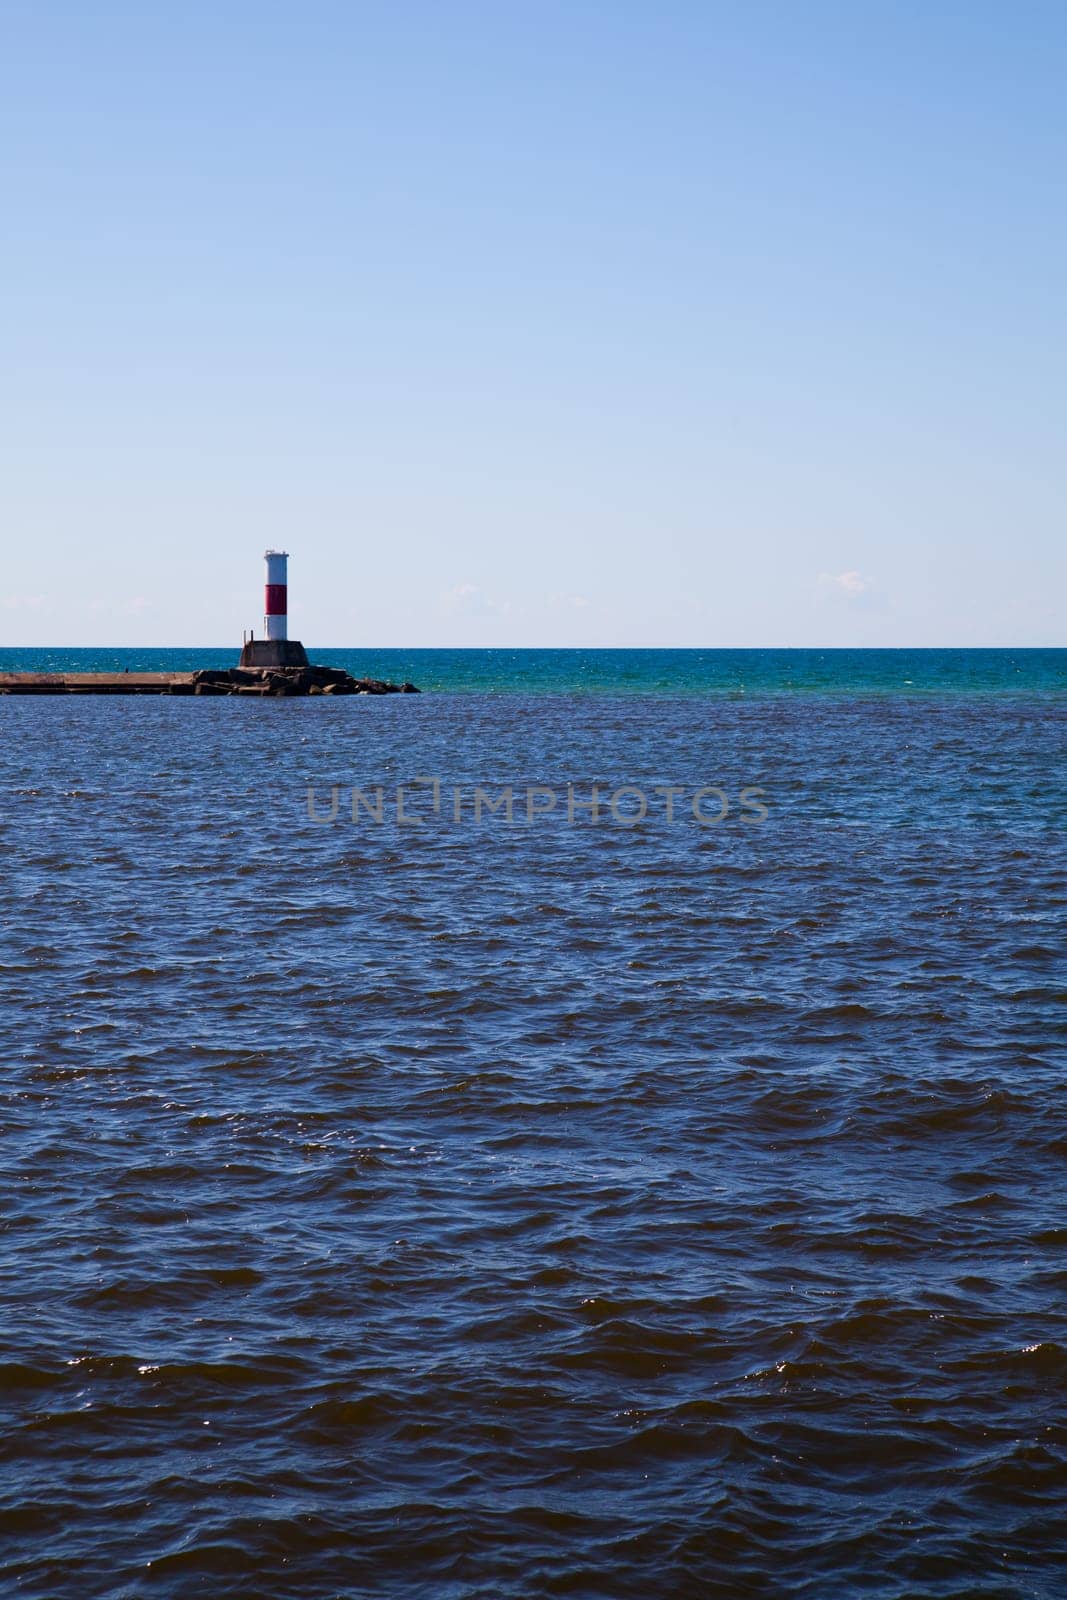 Serene Midday Maritime Scene with Red and White Lighthouse on Lake Michigan by njproductions